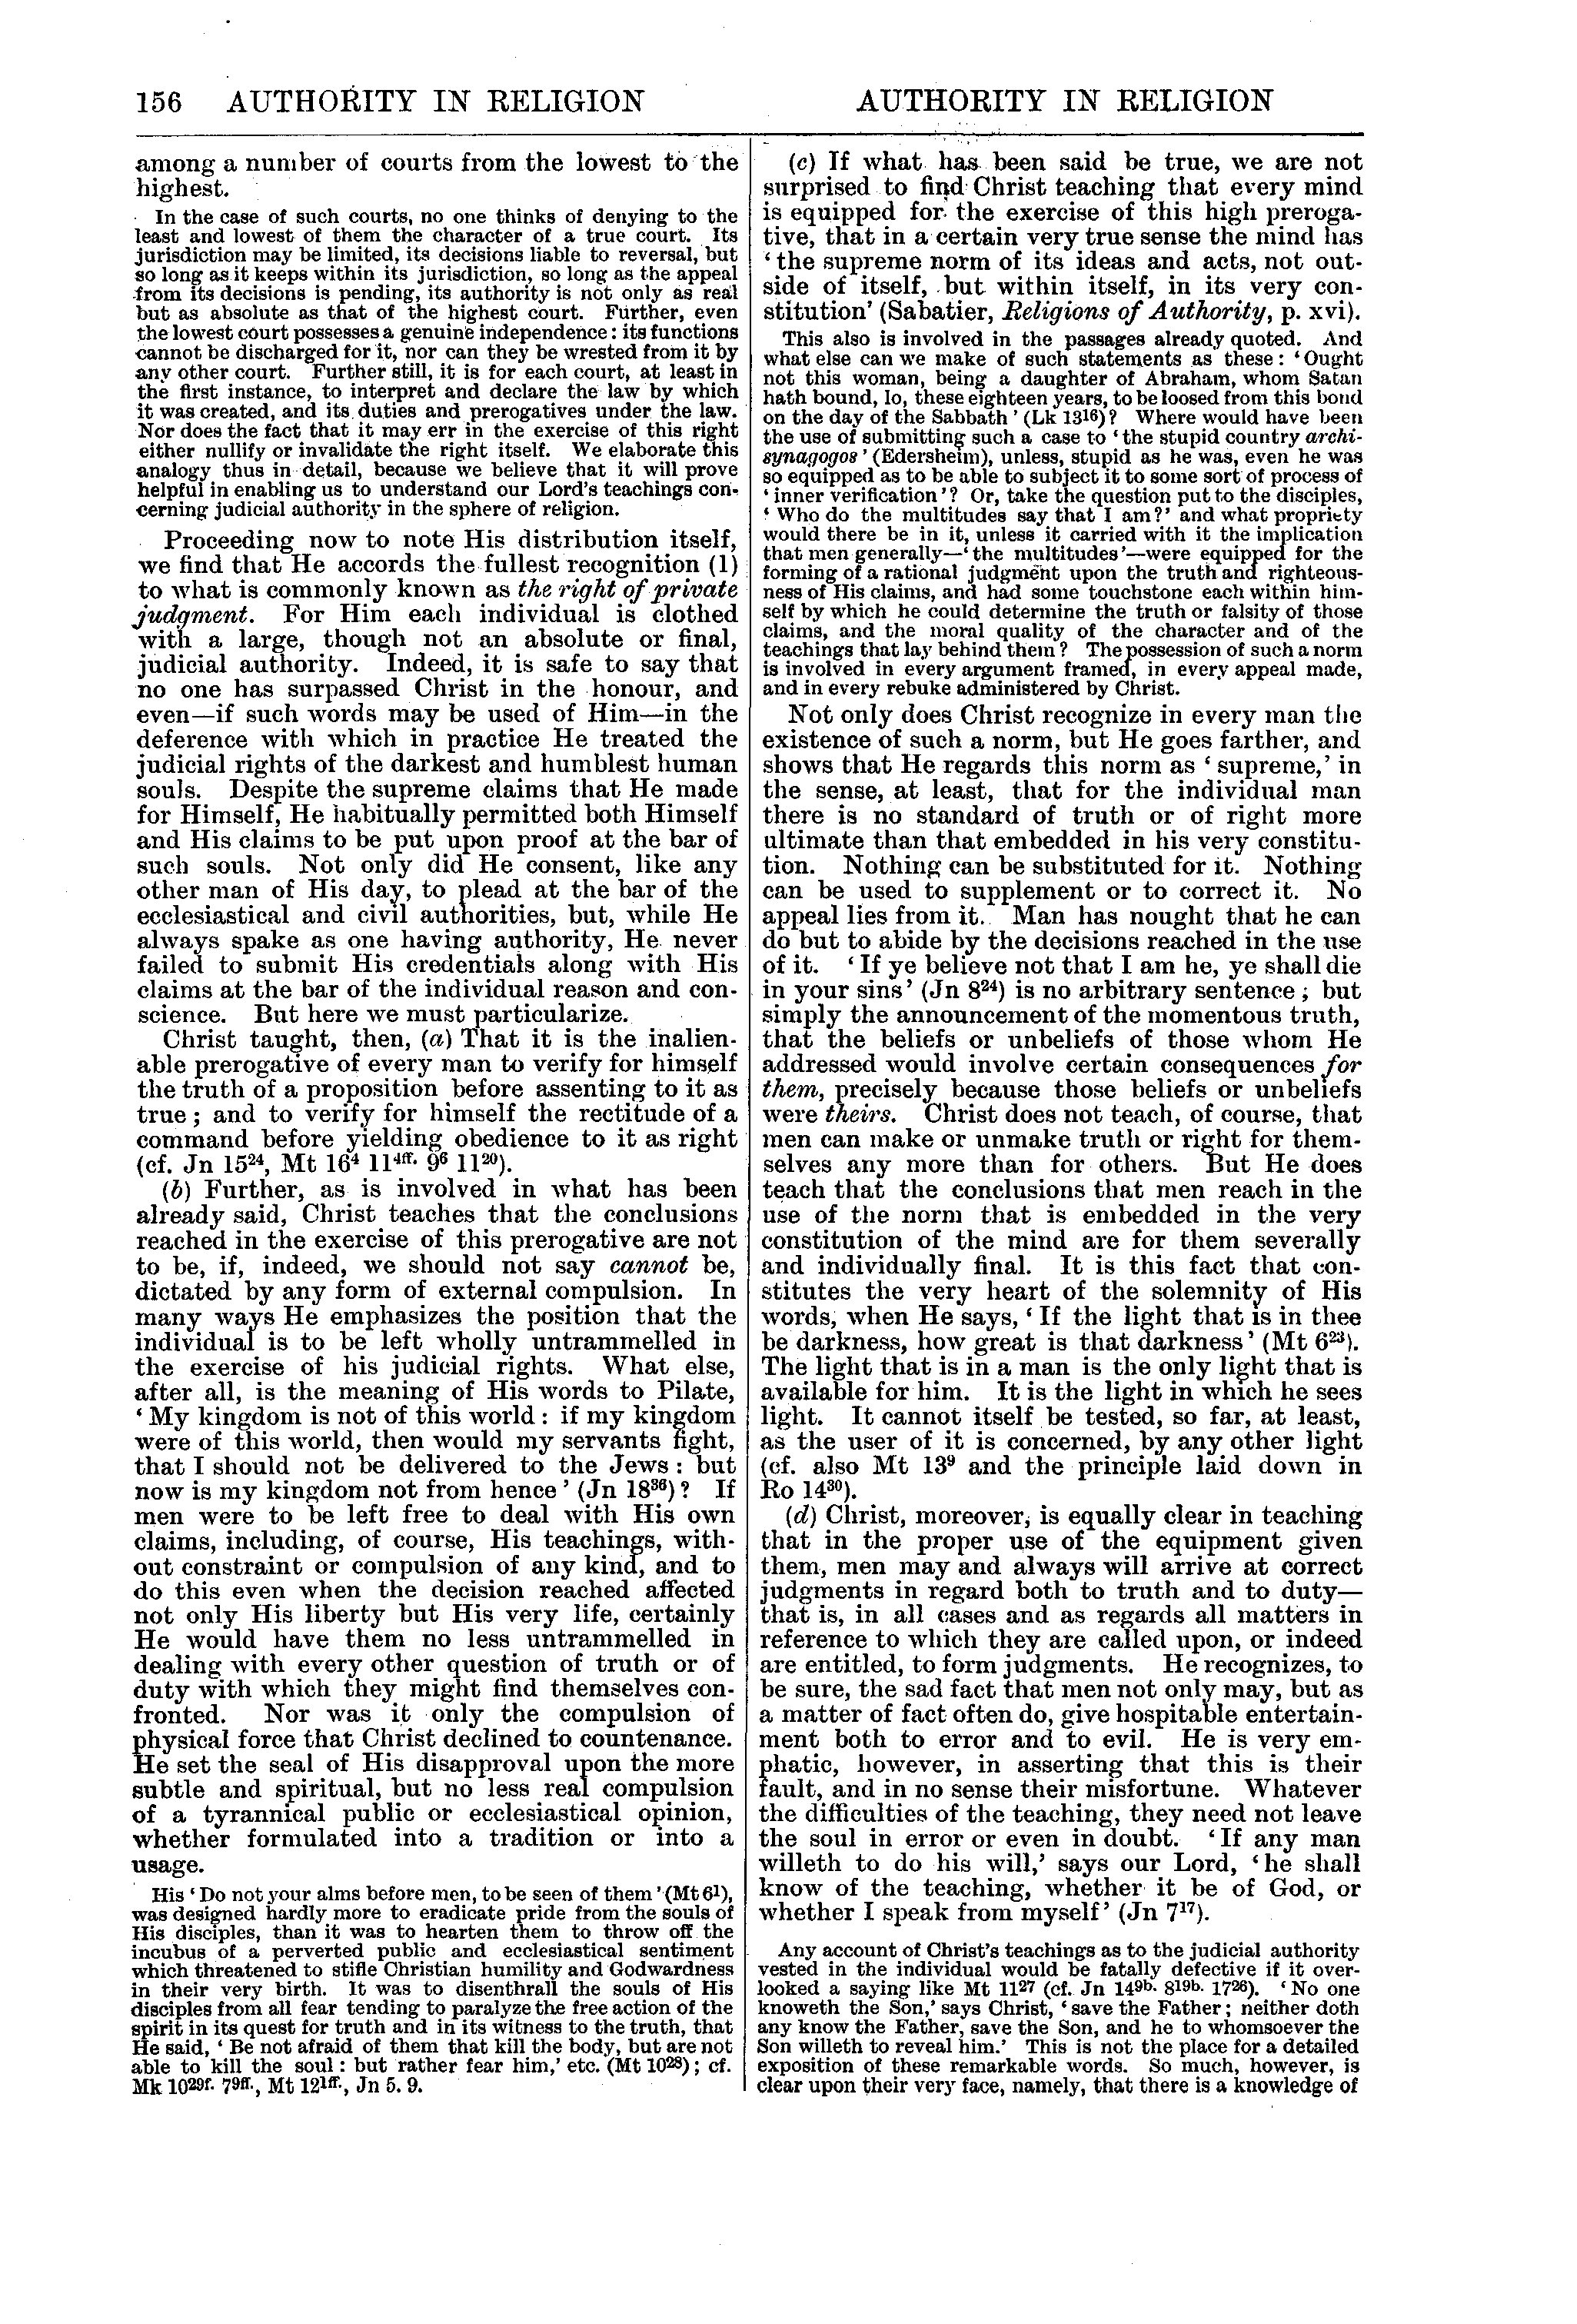 Image of page 156